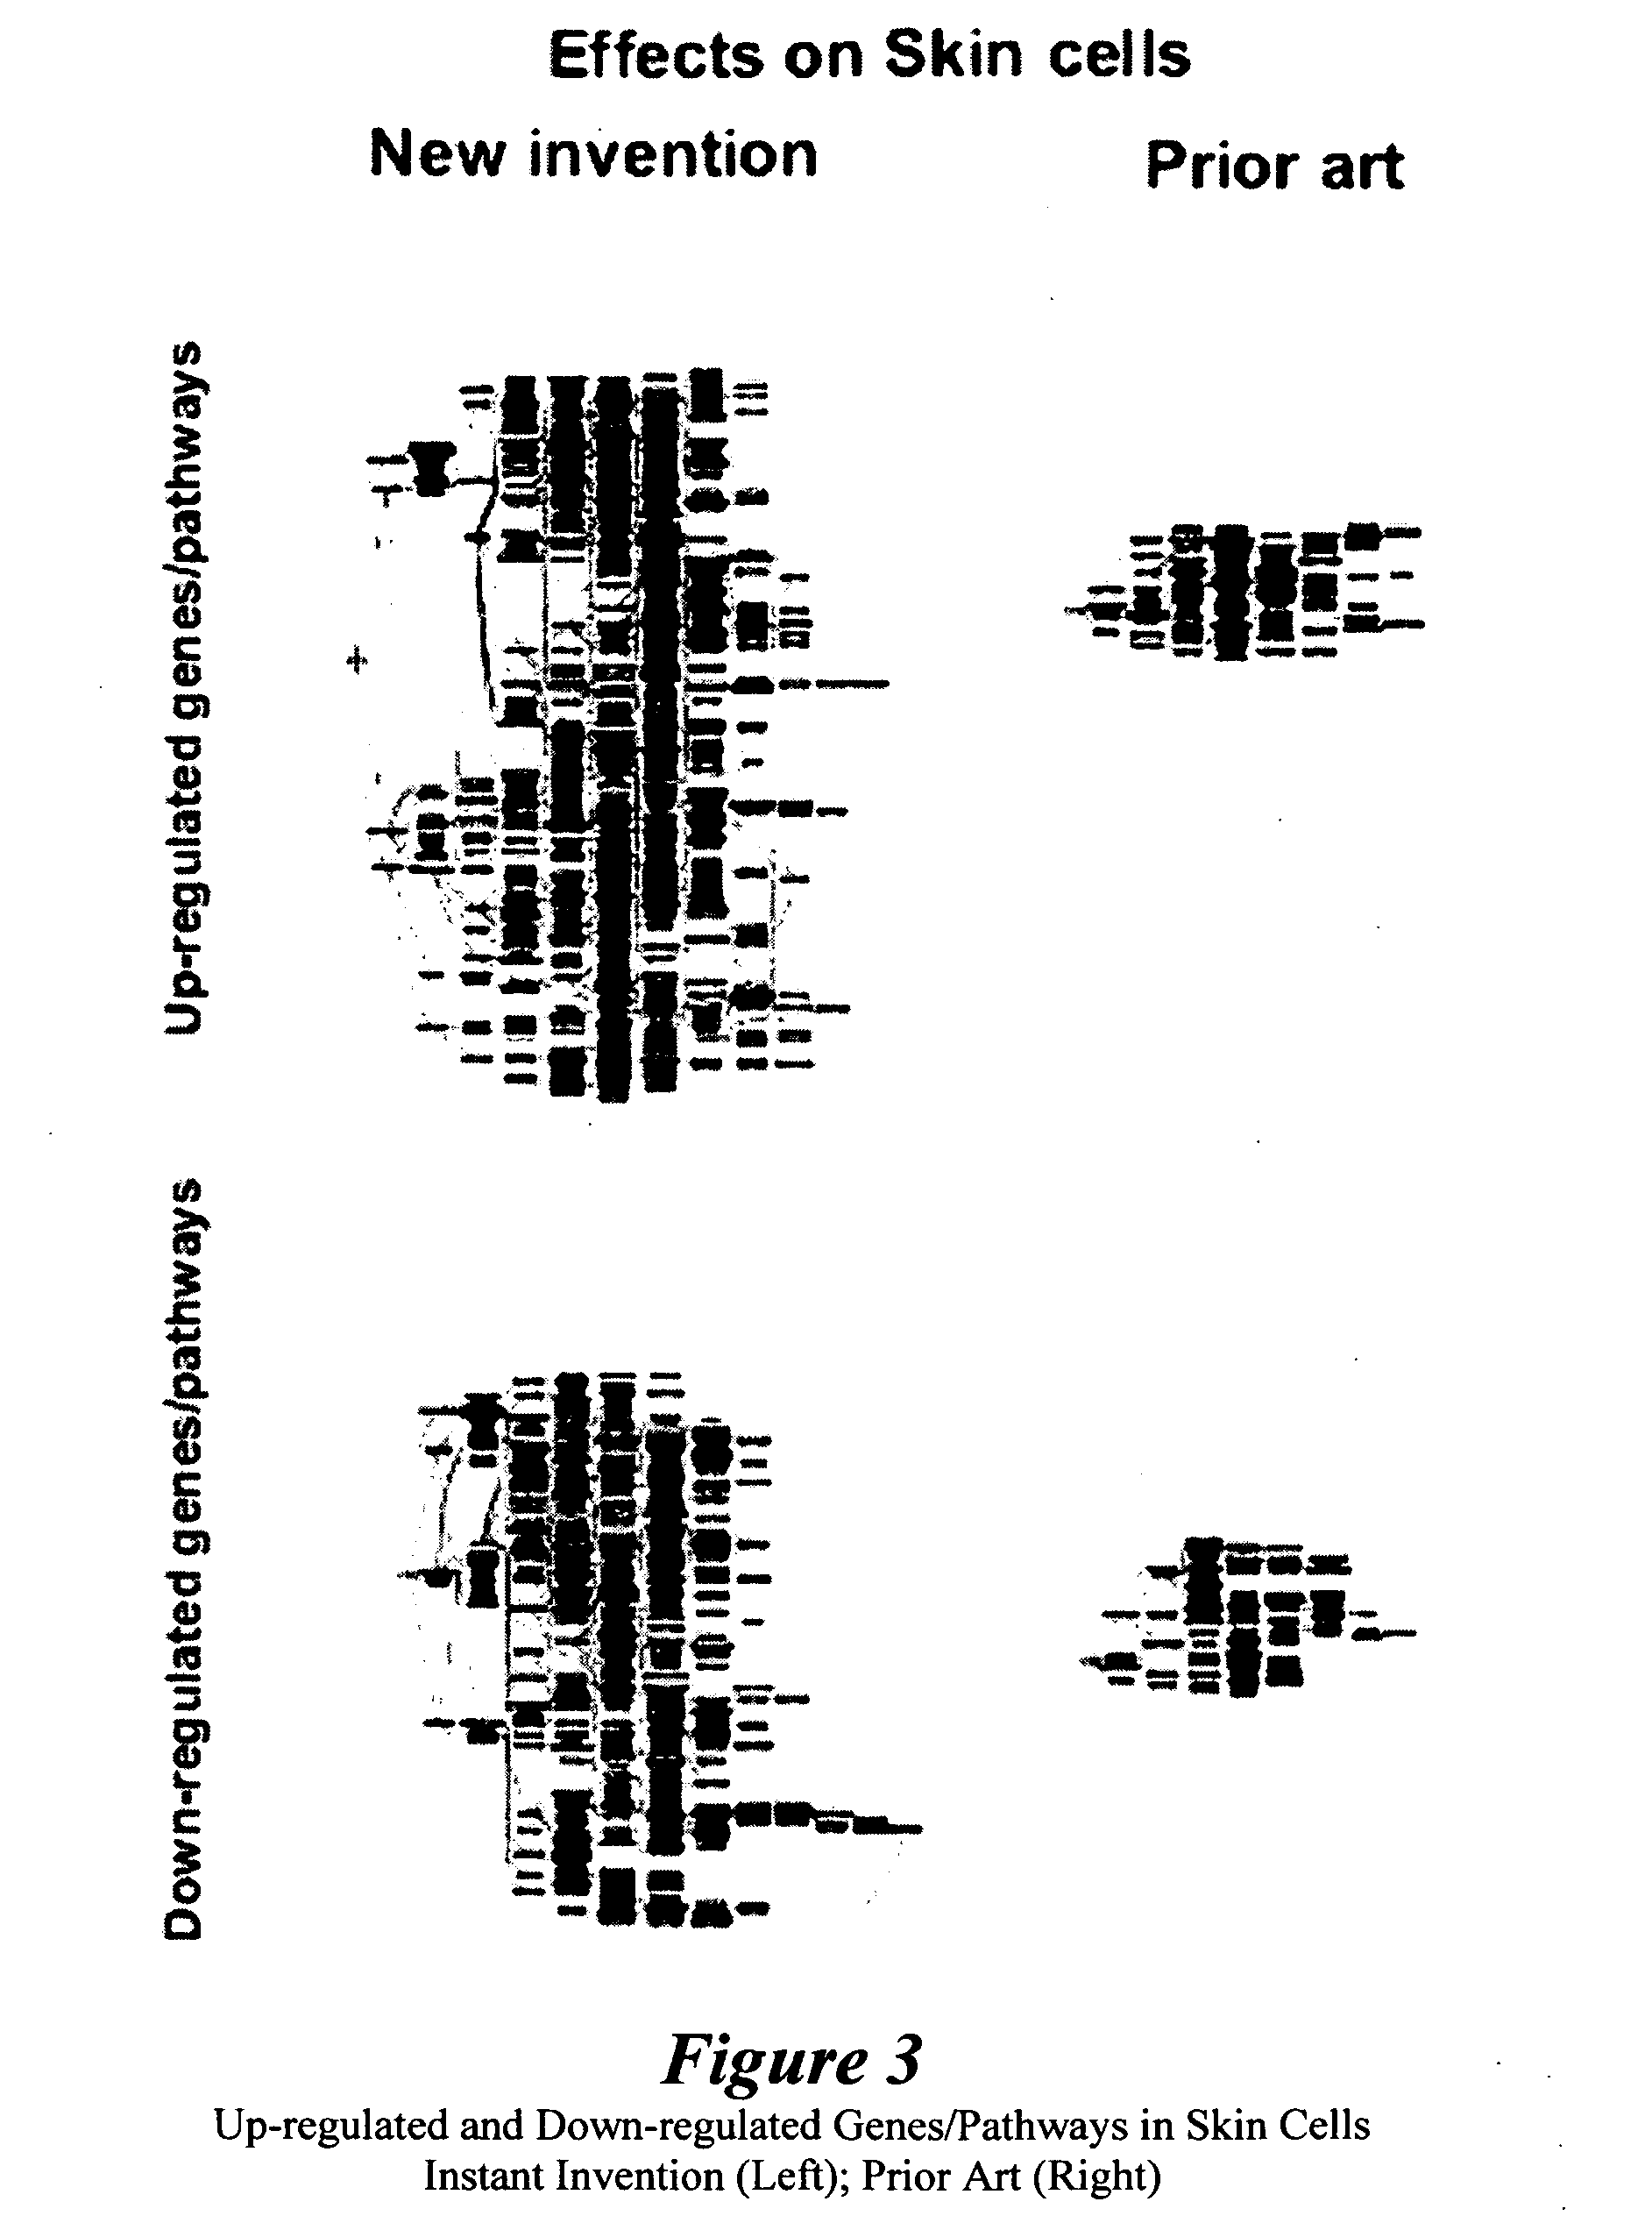 Biological tissue regenerative agent and method for preparing and using same